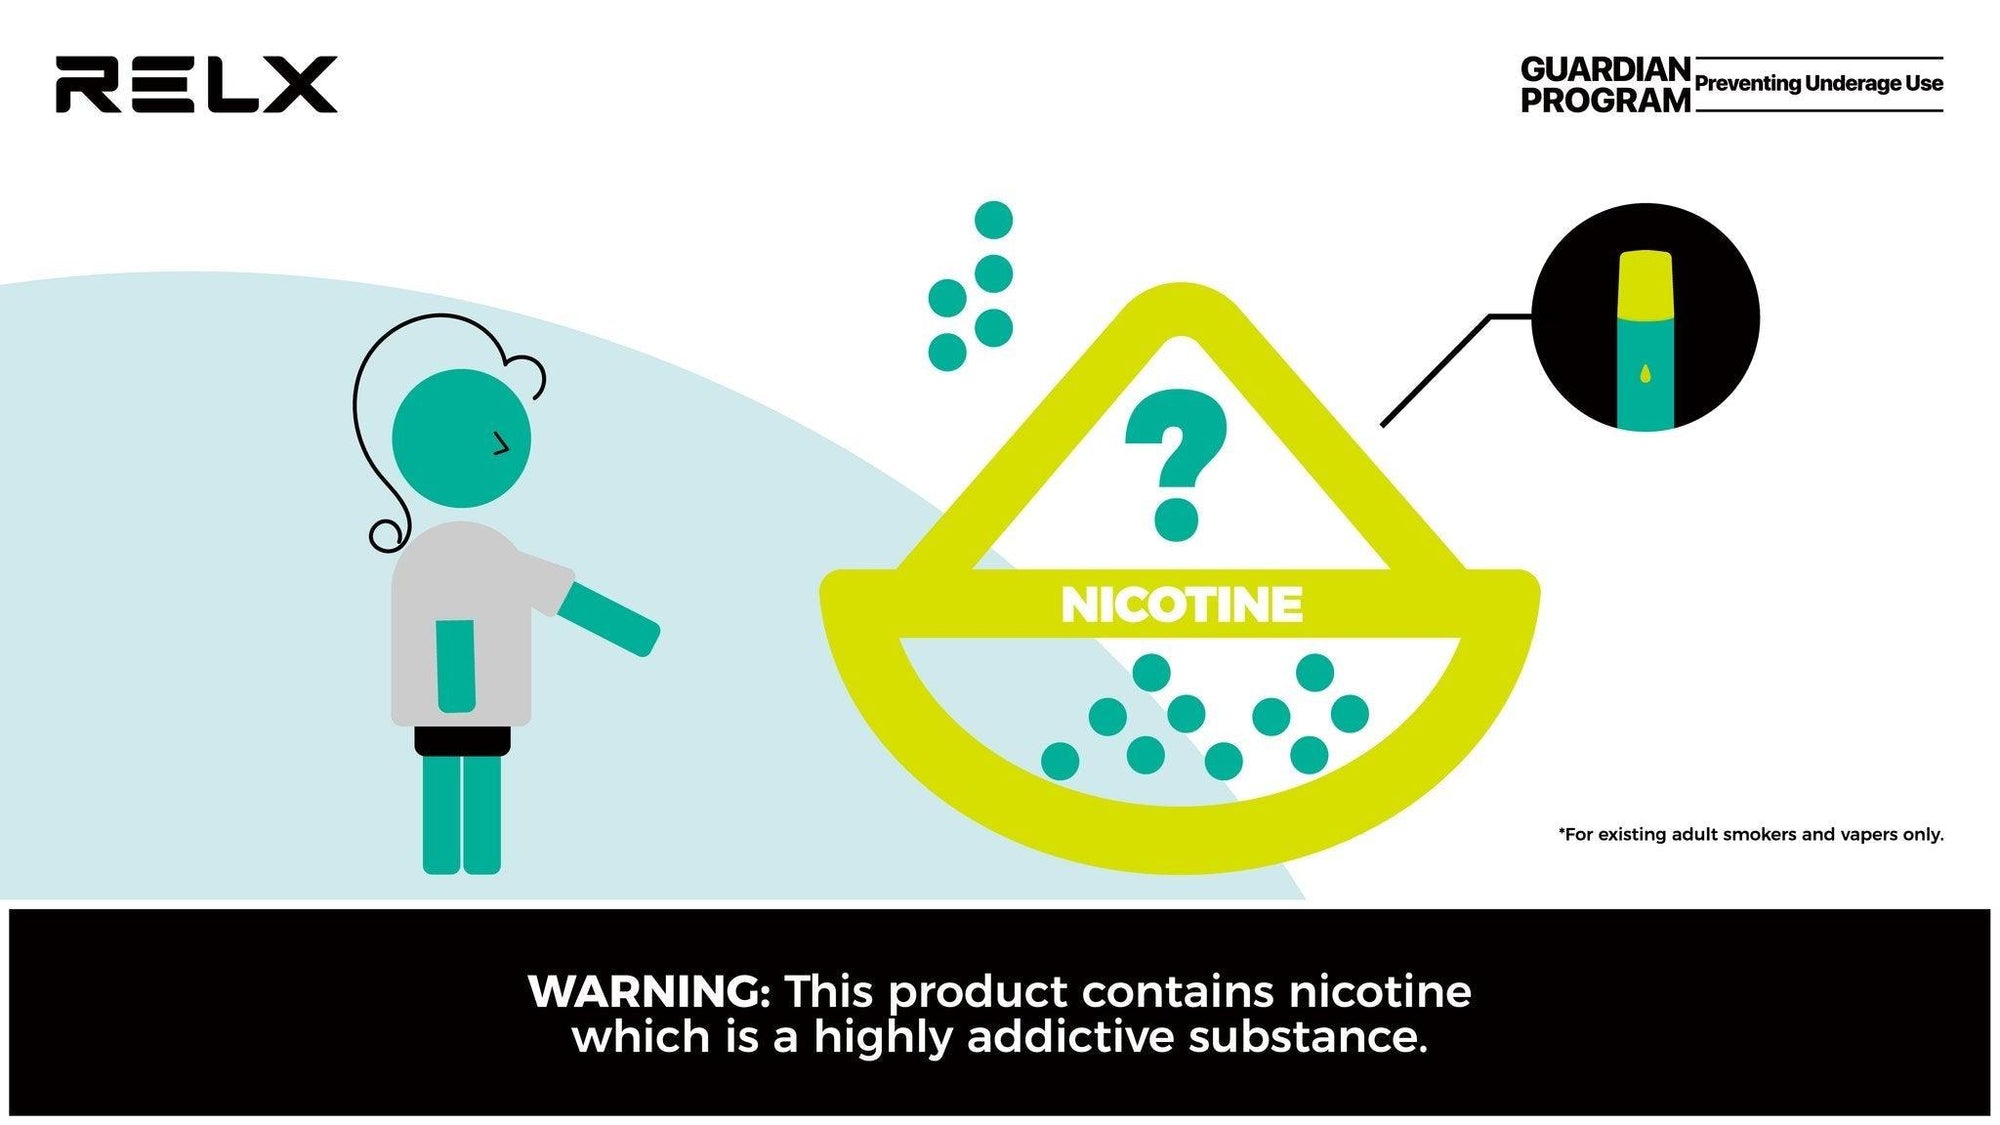 How Much Nicotine is in a Cigarette Compared to Vape? - RELX Global